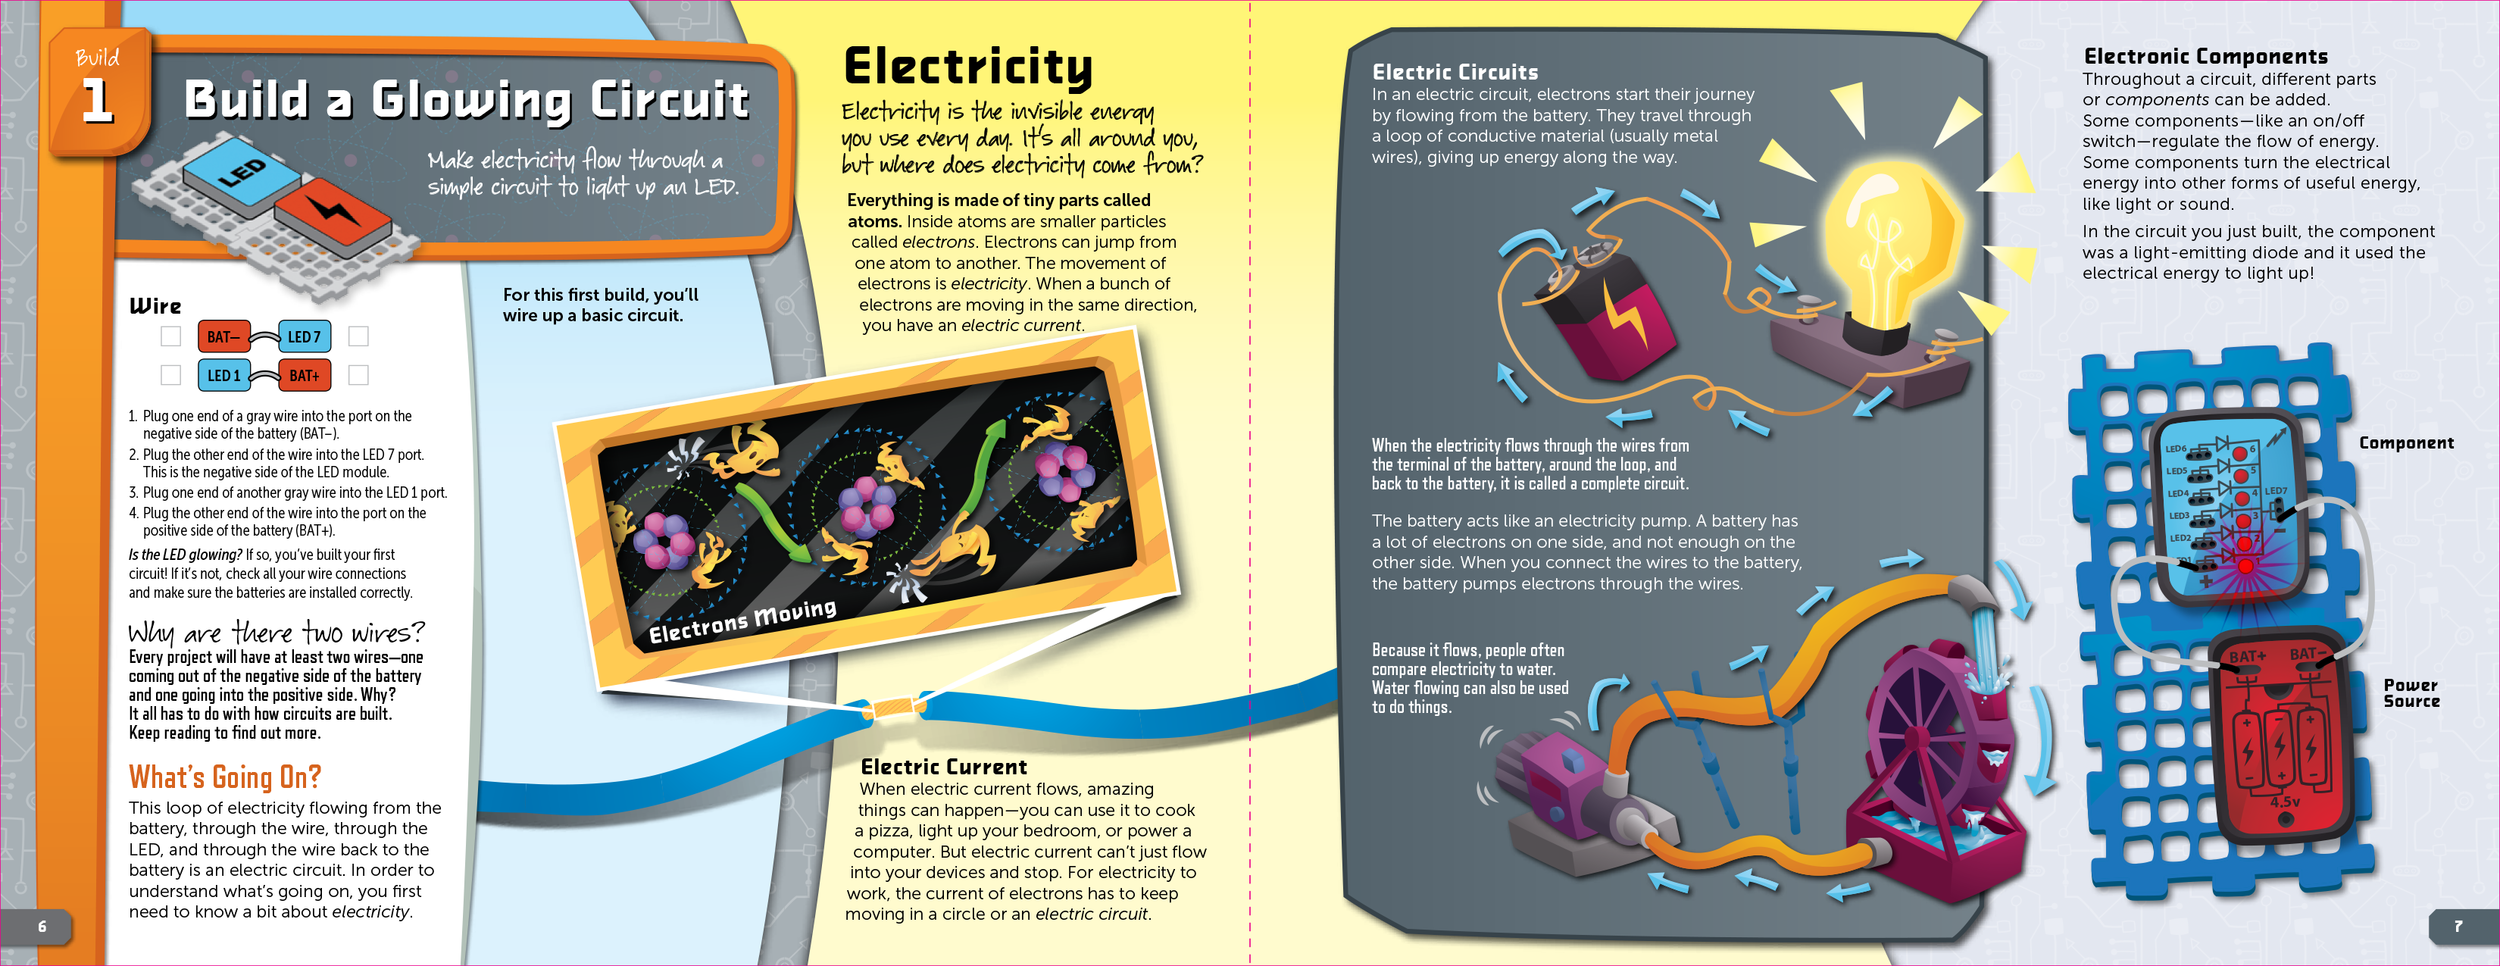 14786-SmartCircuits-Book-4.png